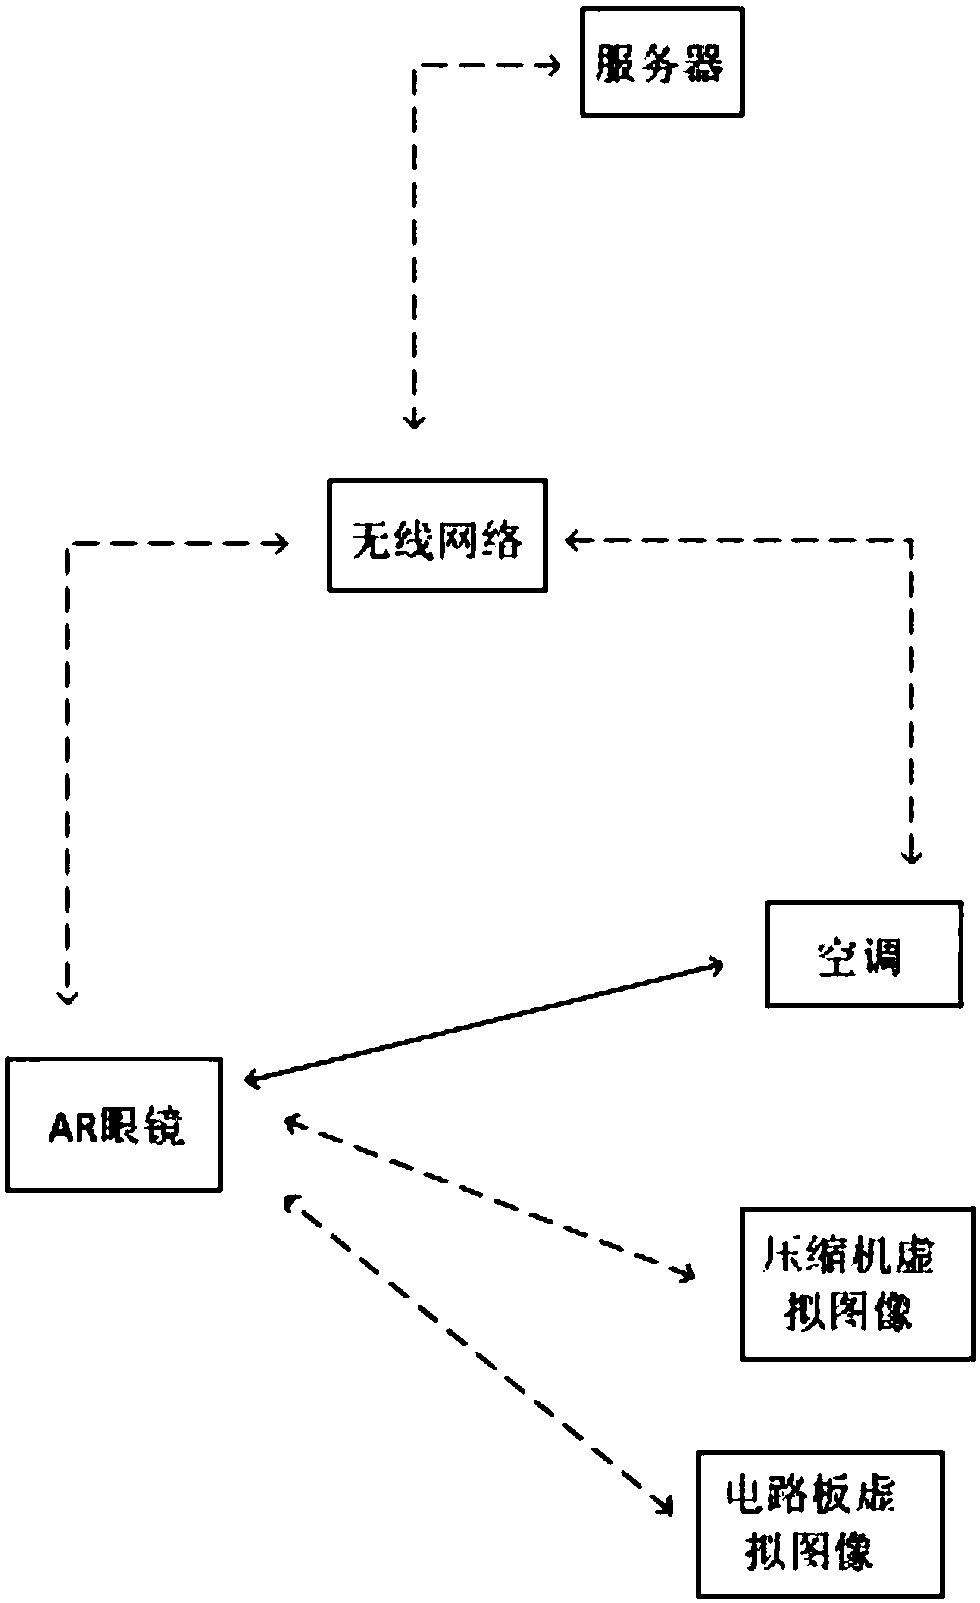 Device fault display method and device, storage medium, device and server